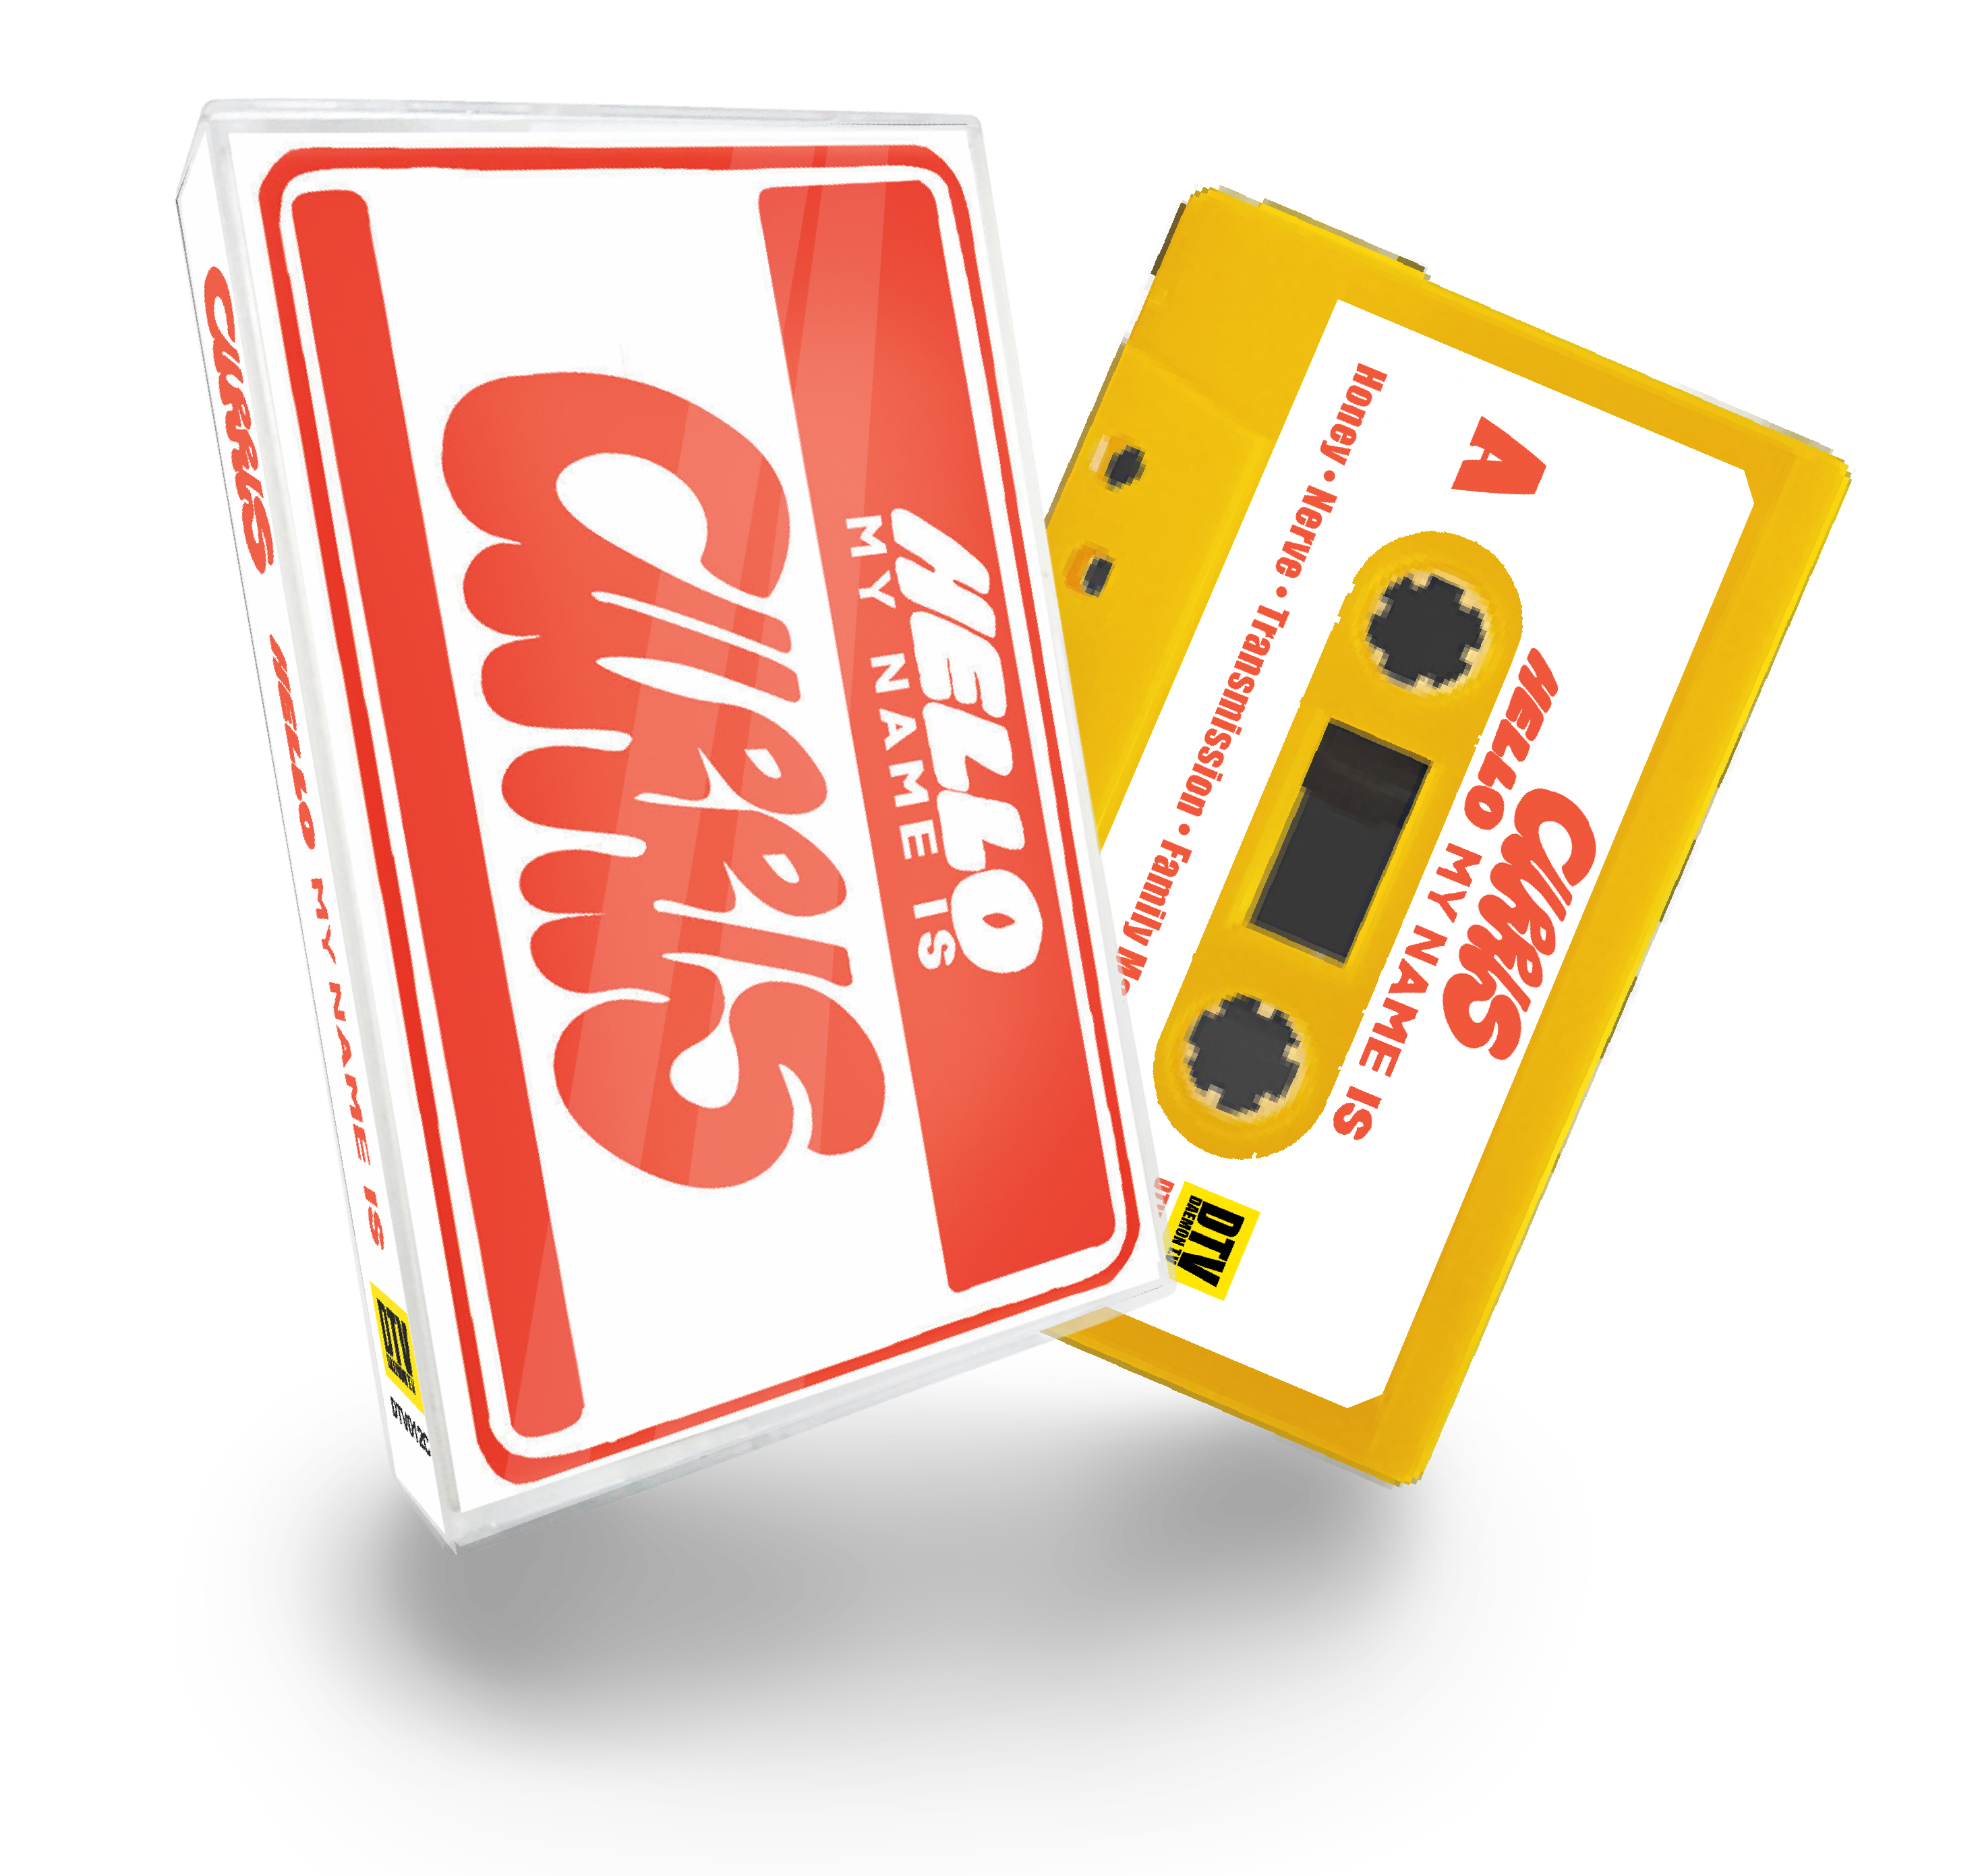 CURRLS ‘HELLO MY NAME IS’ - Ltd Edition Cassette & Zine duo (Sunset Yellow)